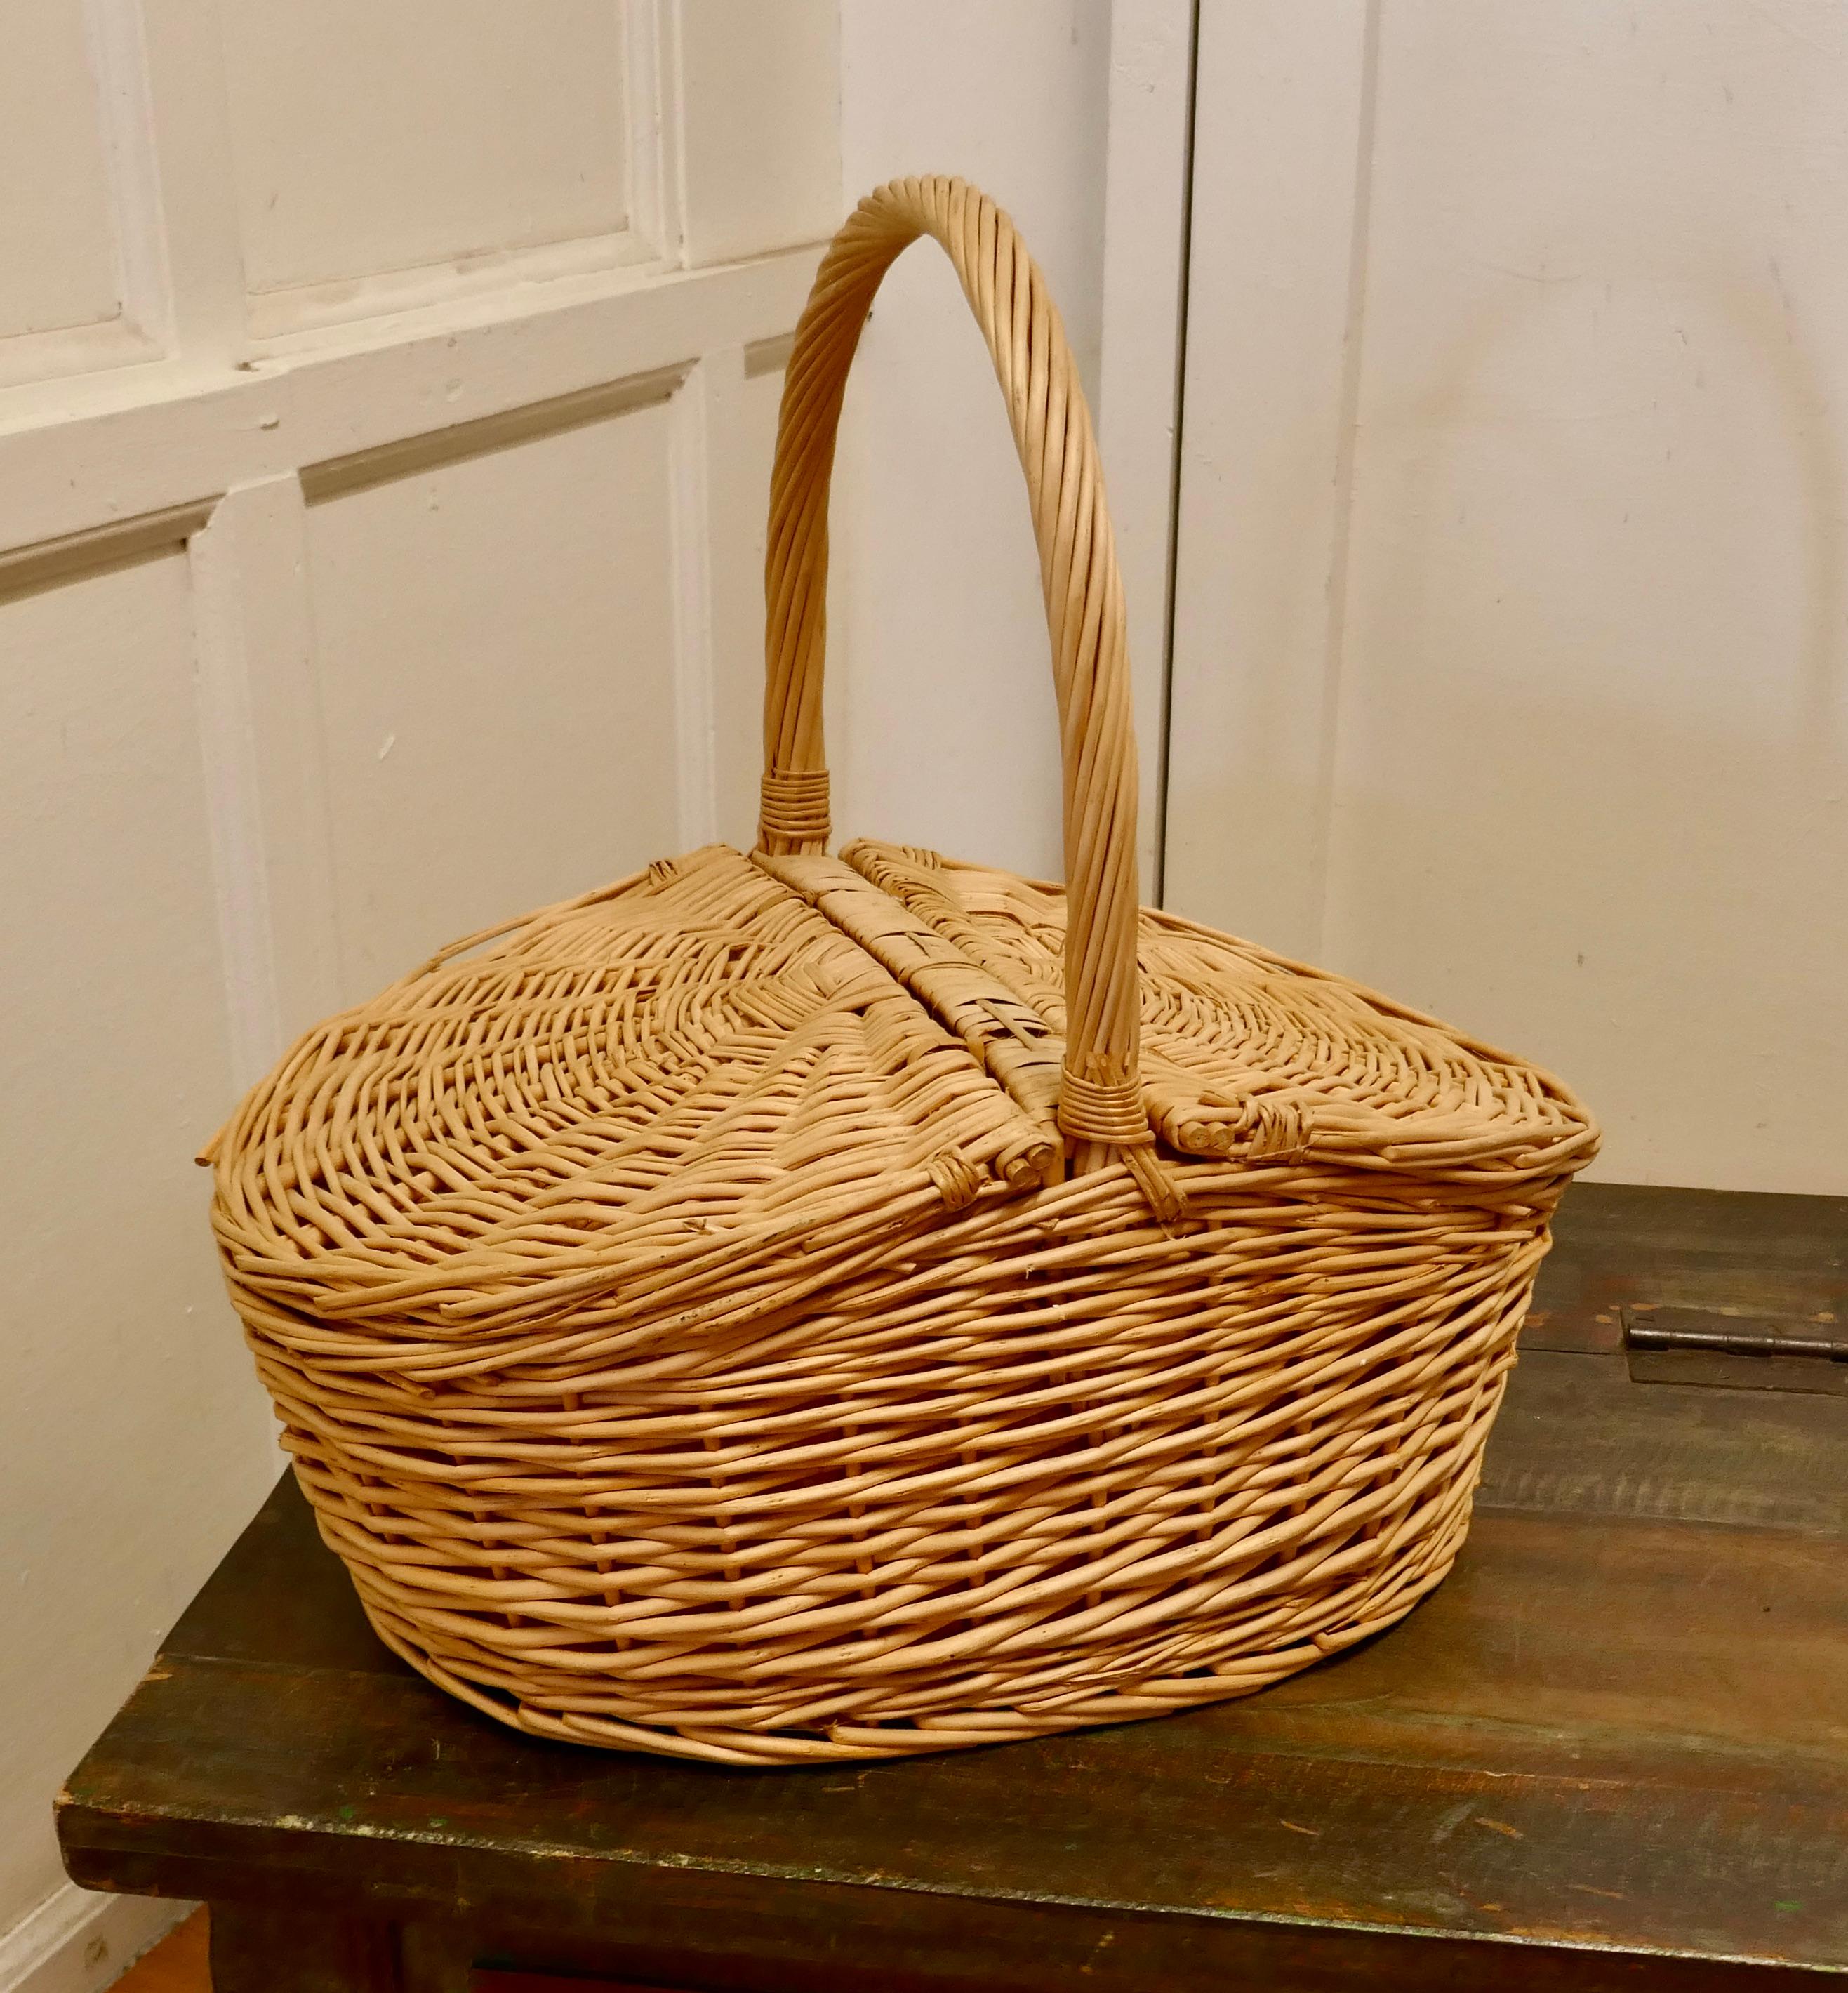 A lined oval wicker picnic basket

An attractive basket with 2 lidded sections and big handle, the basket is lined inside
This is a lovely piece, decorative and useful storage it is sound with very little wear to the wicker 
The Basket is 20”